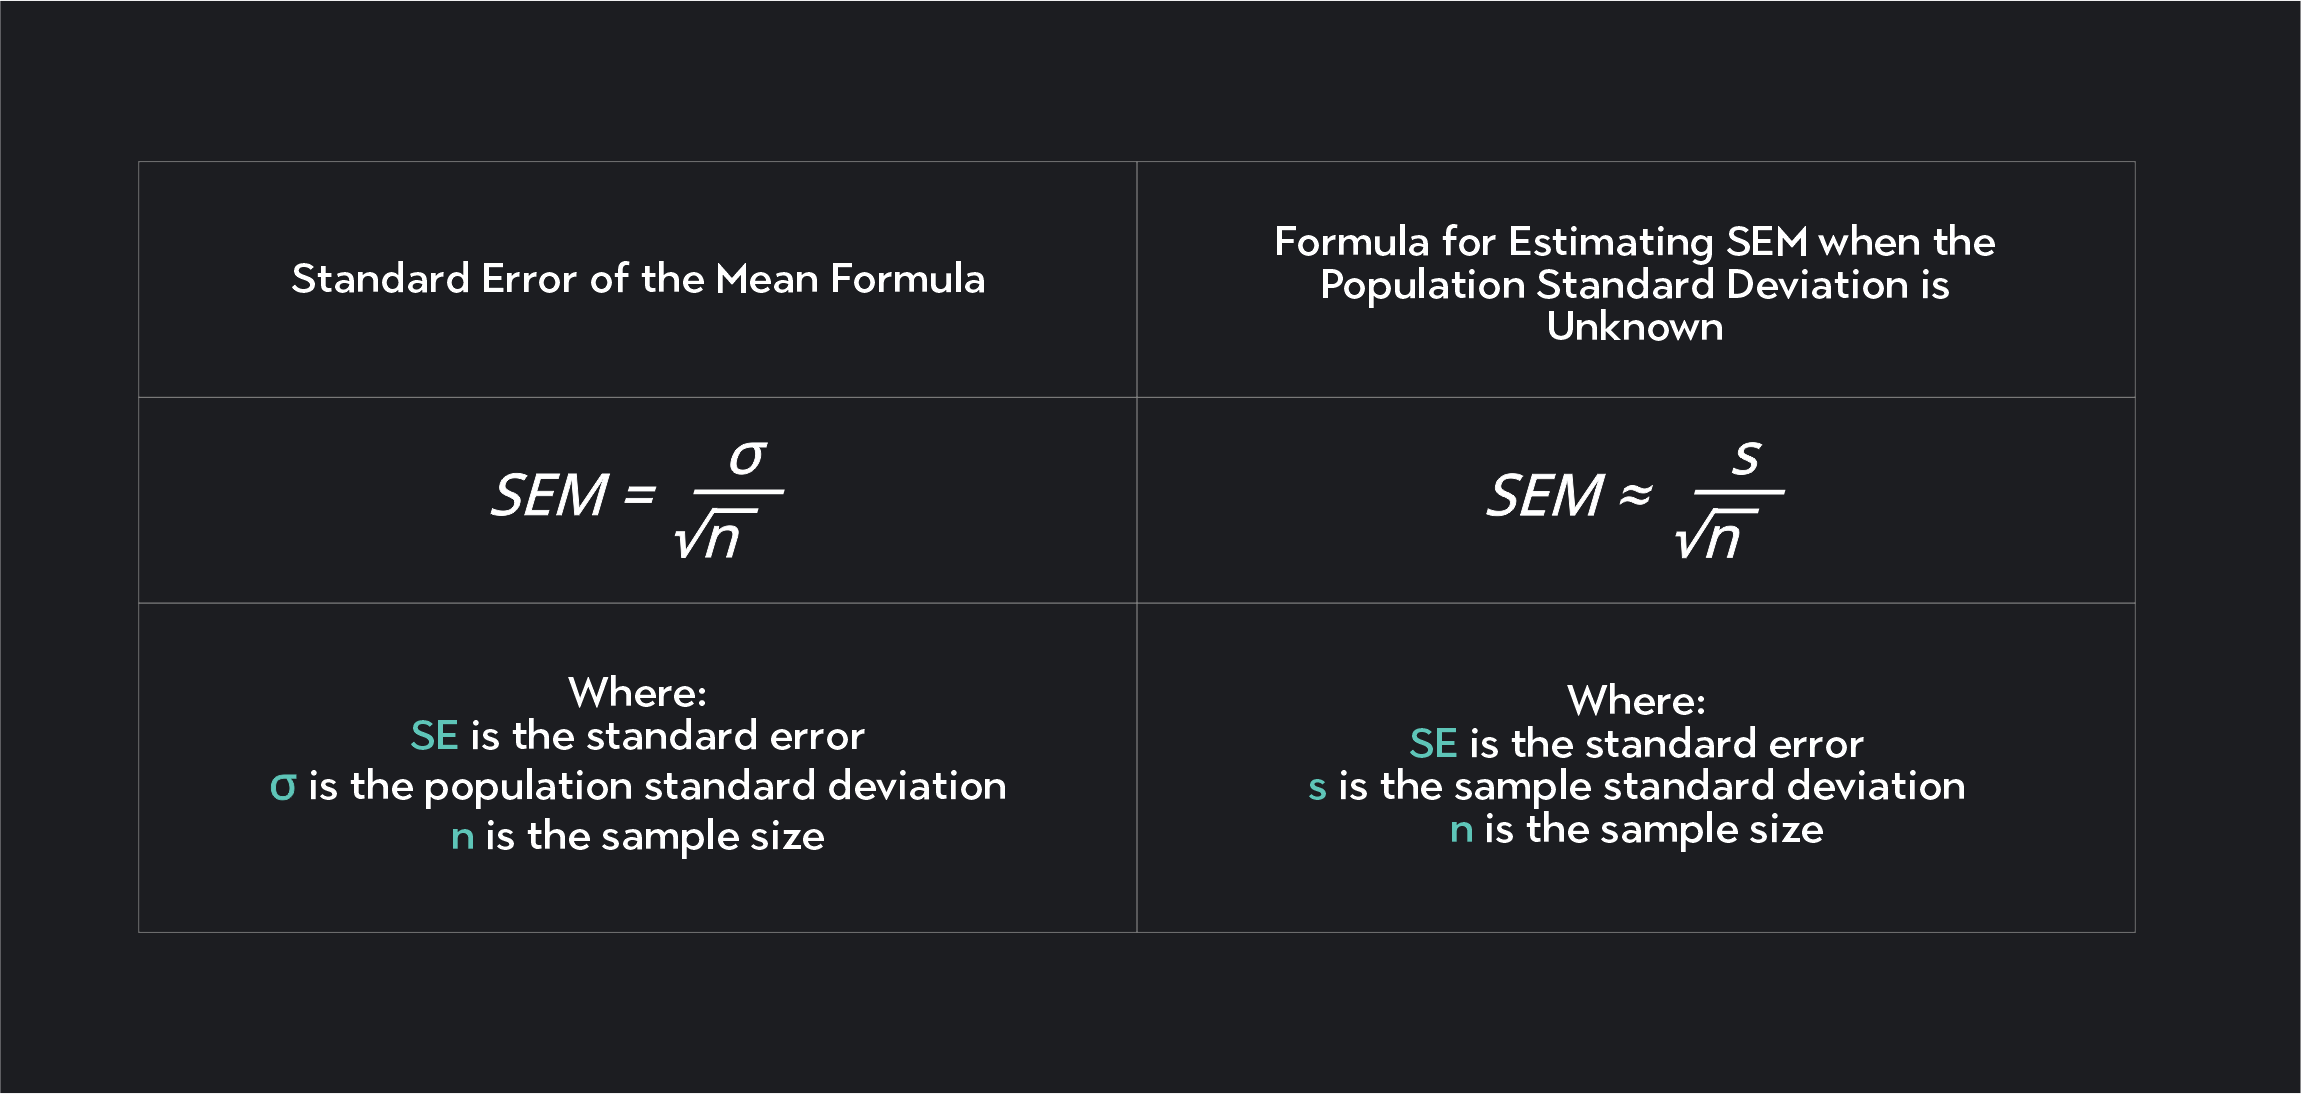 Graph showing Standard Error of the mean formula and the formula for estimating SEM when the population standard deviation is unknown